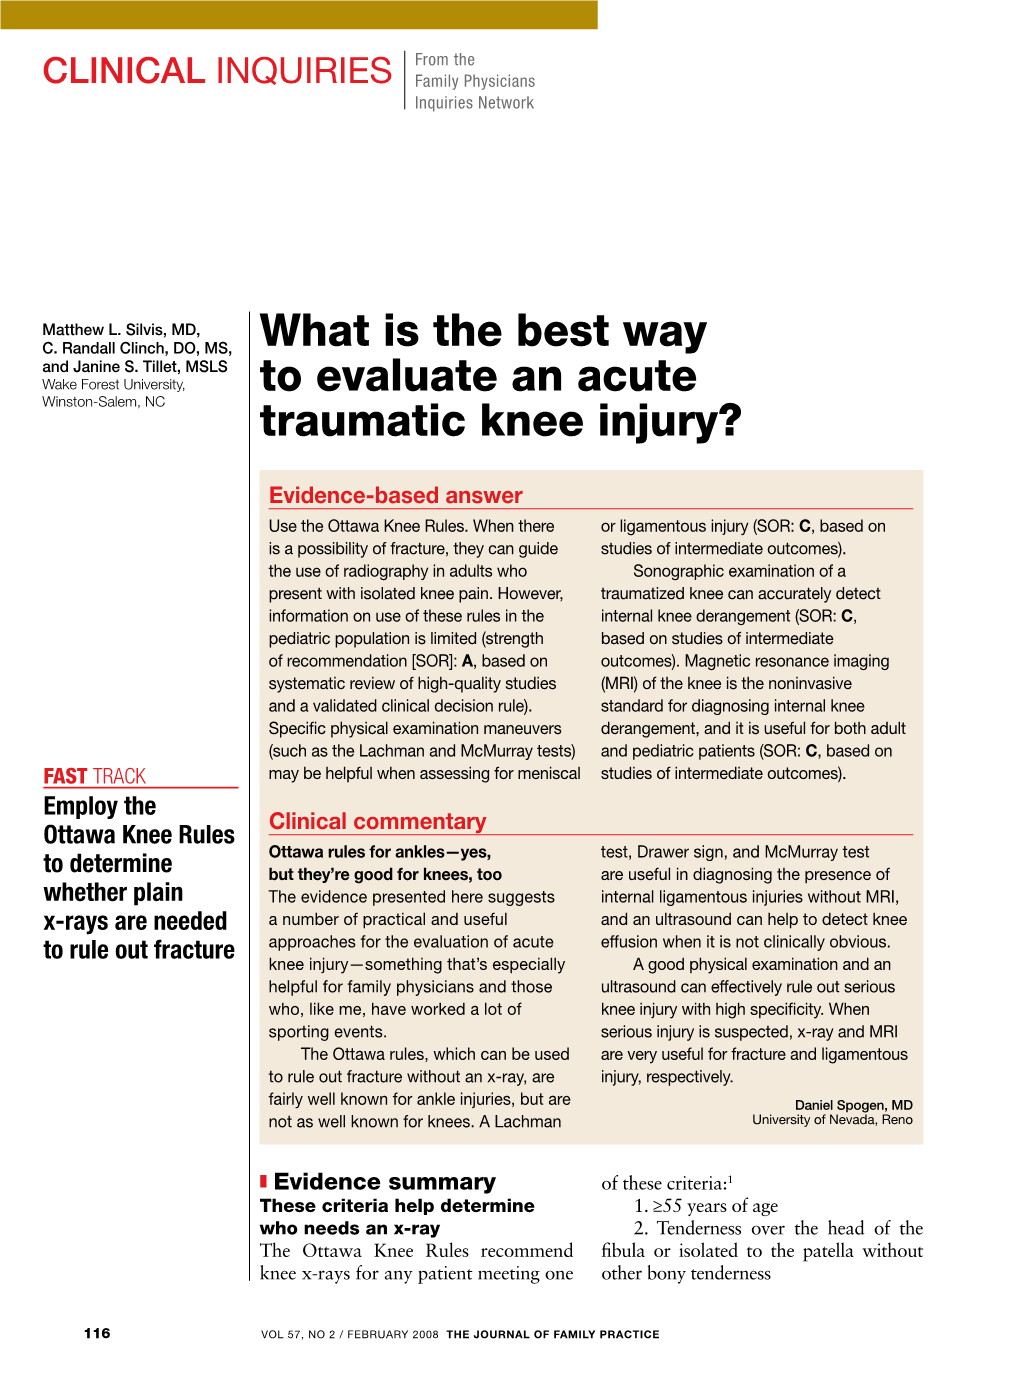 What Is the Best Way to Evaluate an Acute Traumatic Knee Injury?